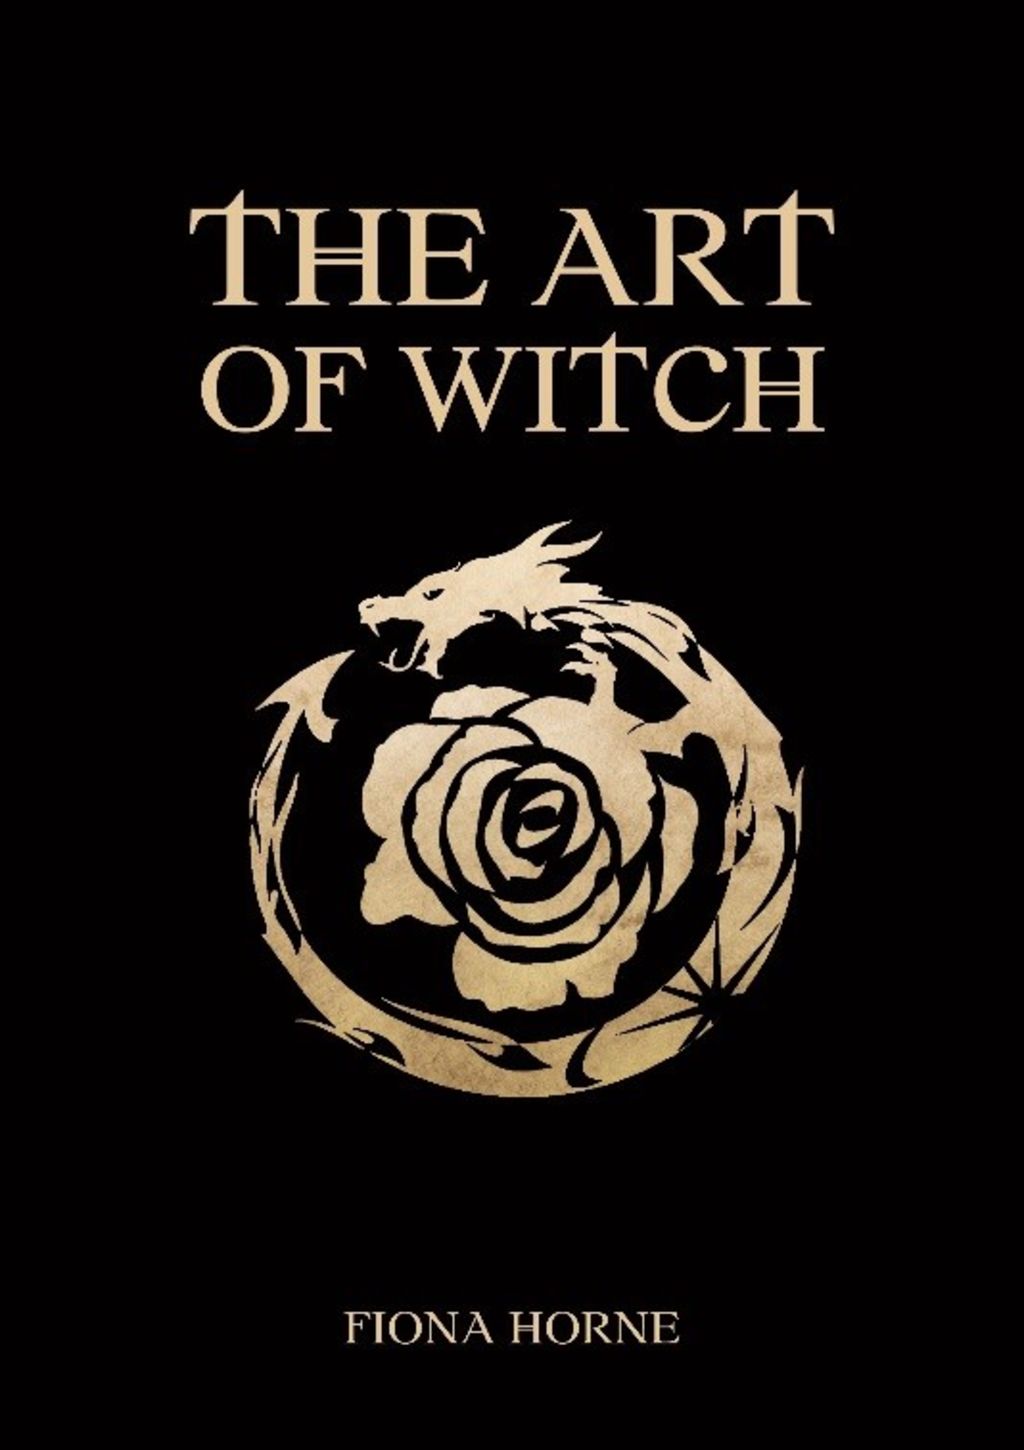 The Art of Witch by Fiona Horne. Photo: Supplied.